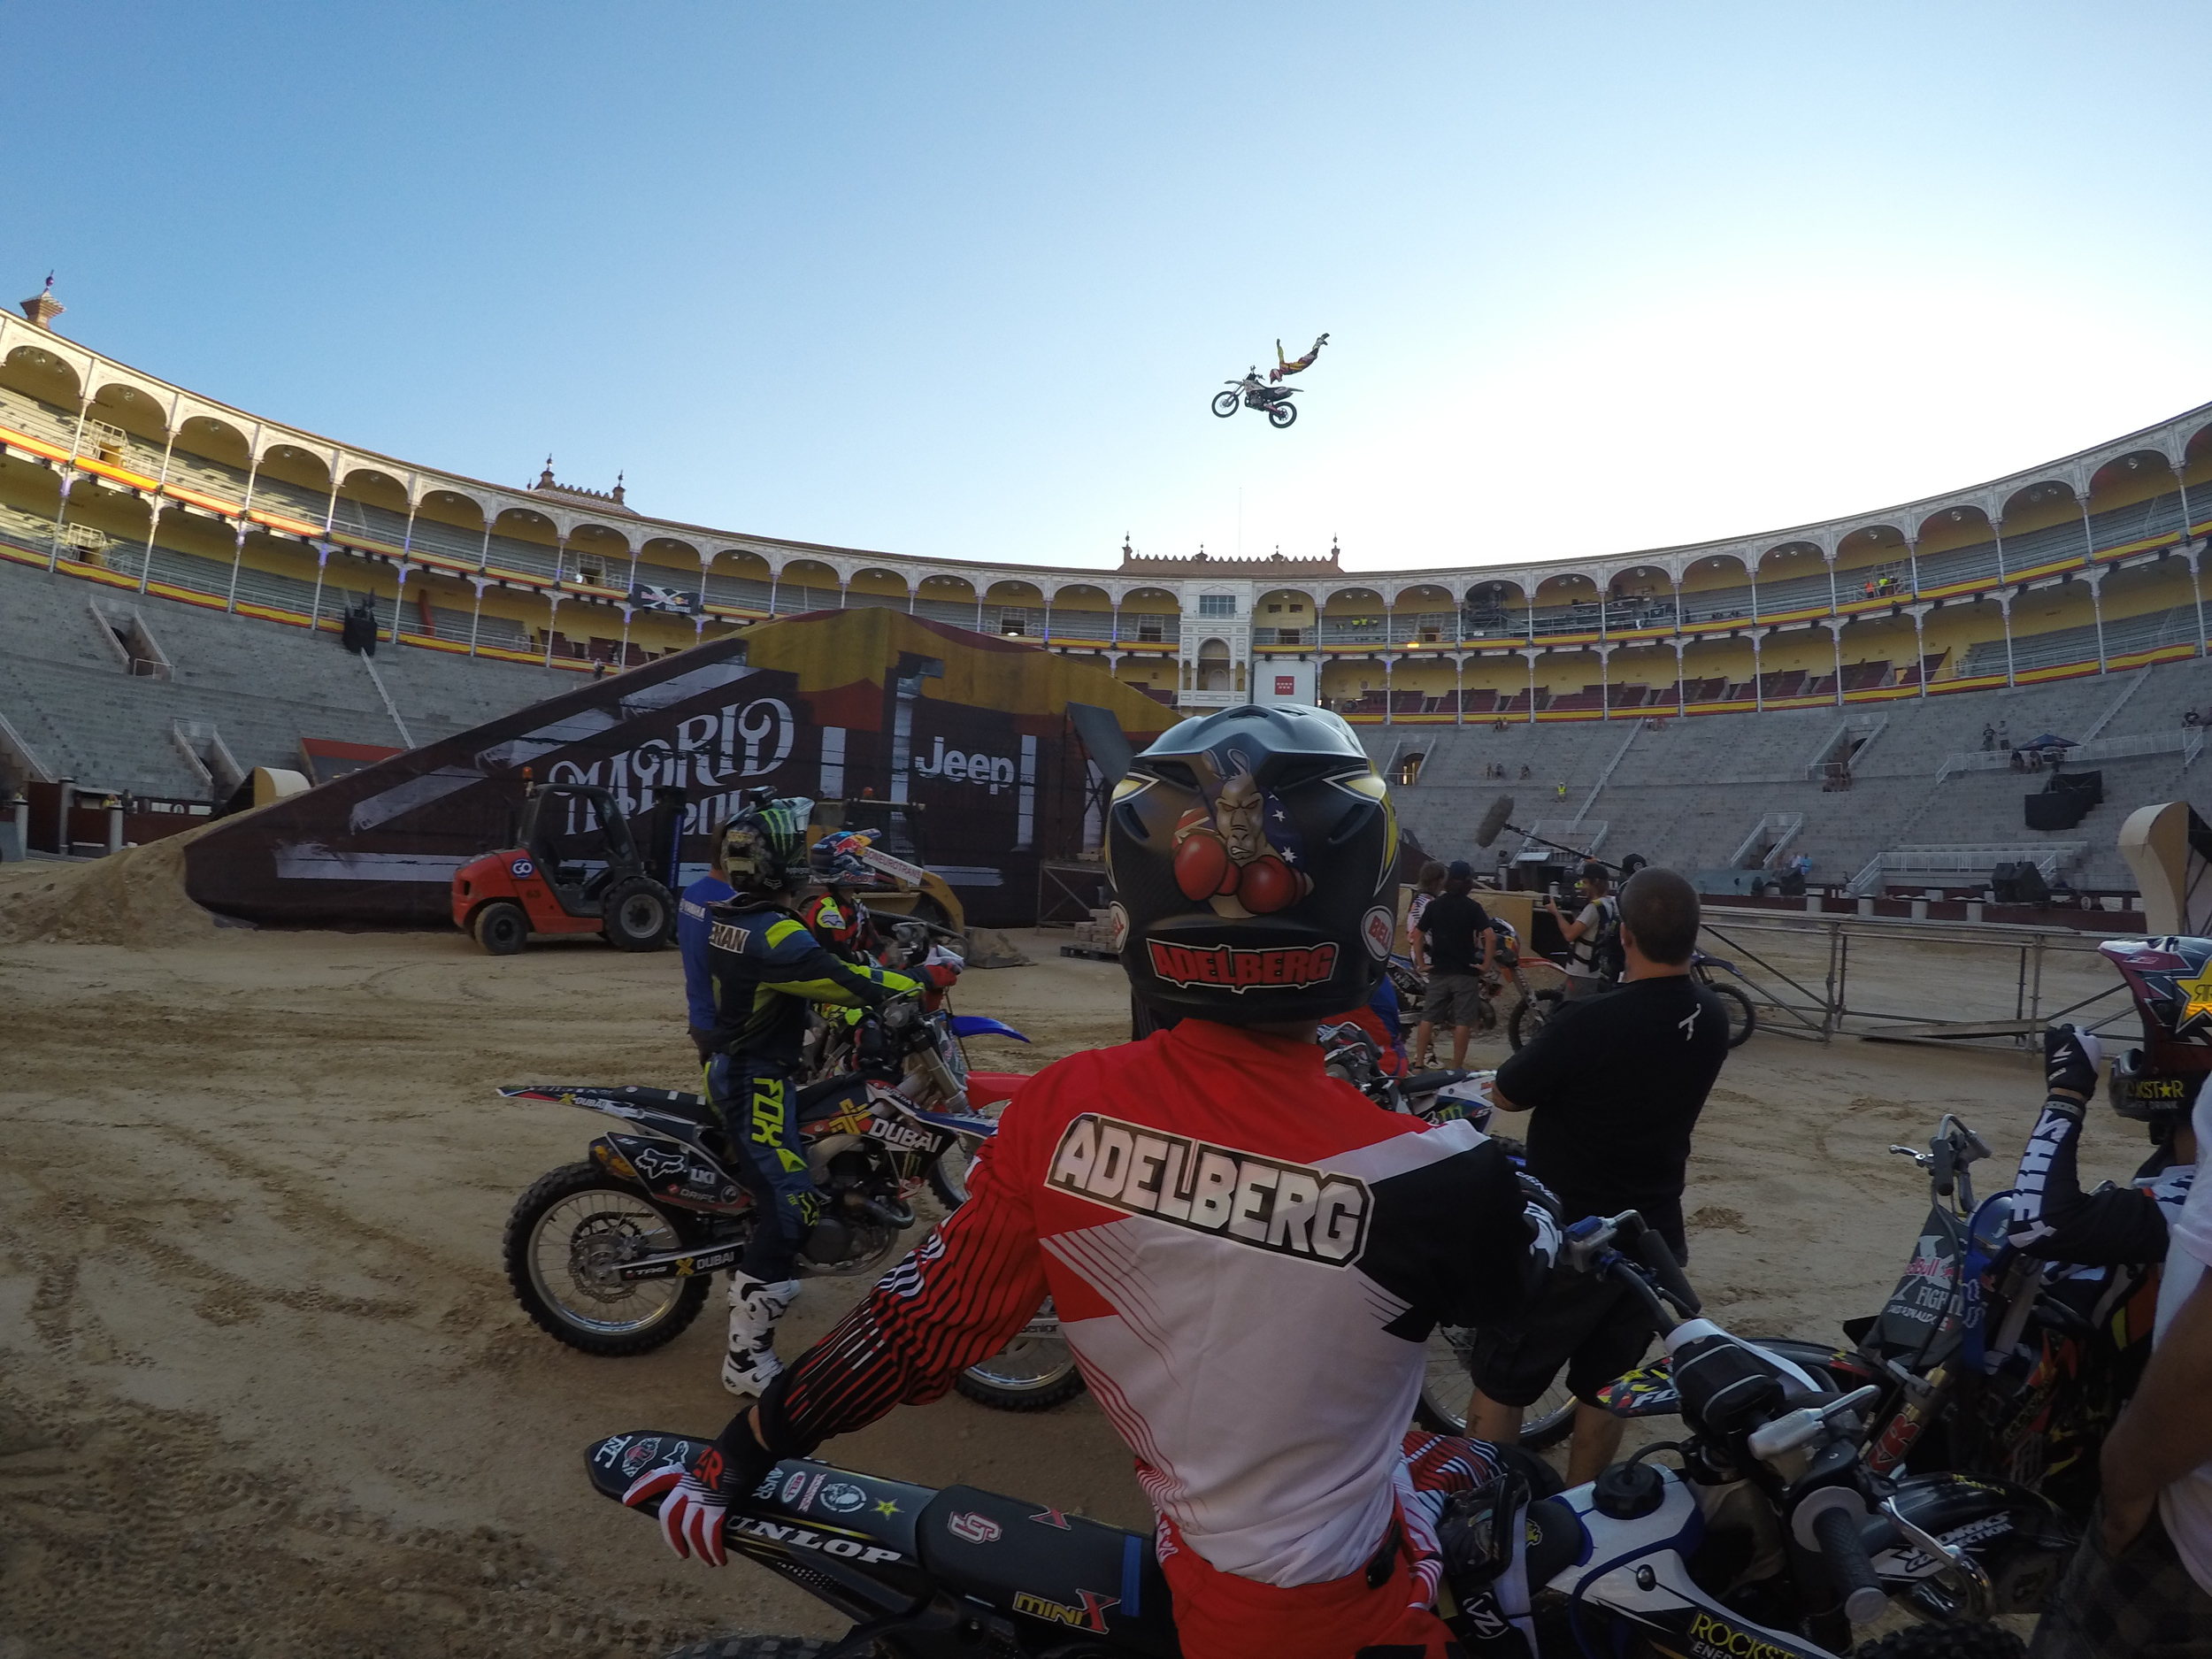 Course testing at RedBull X Fighters